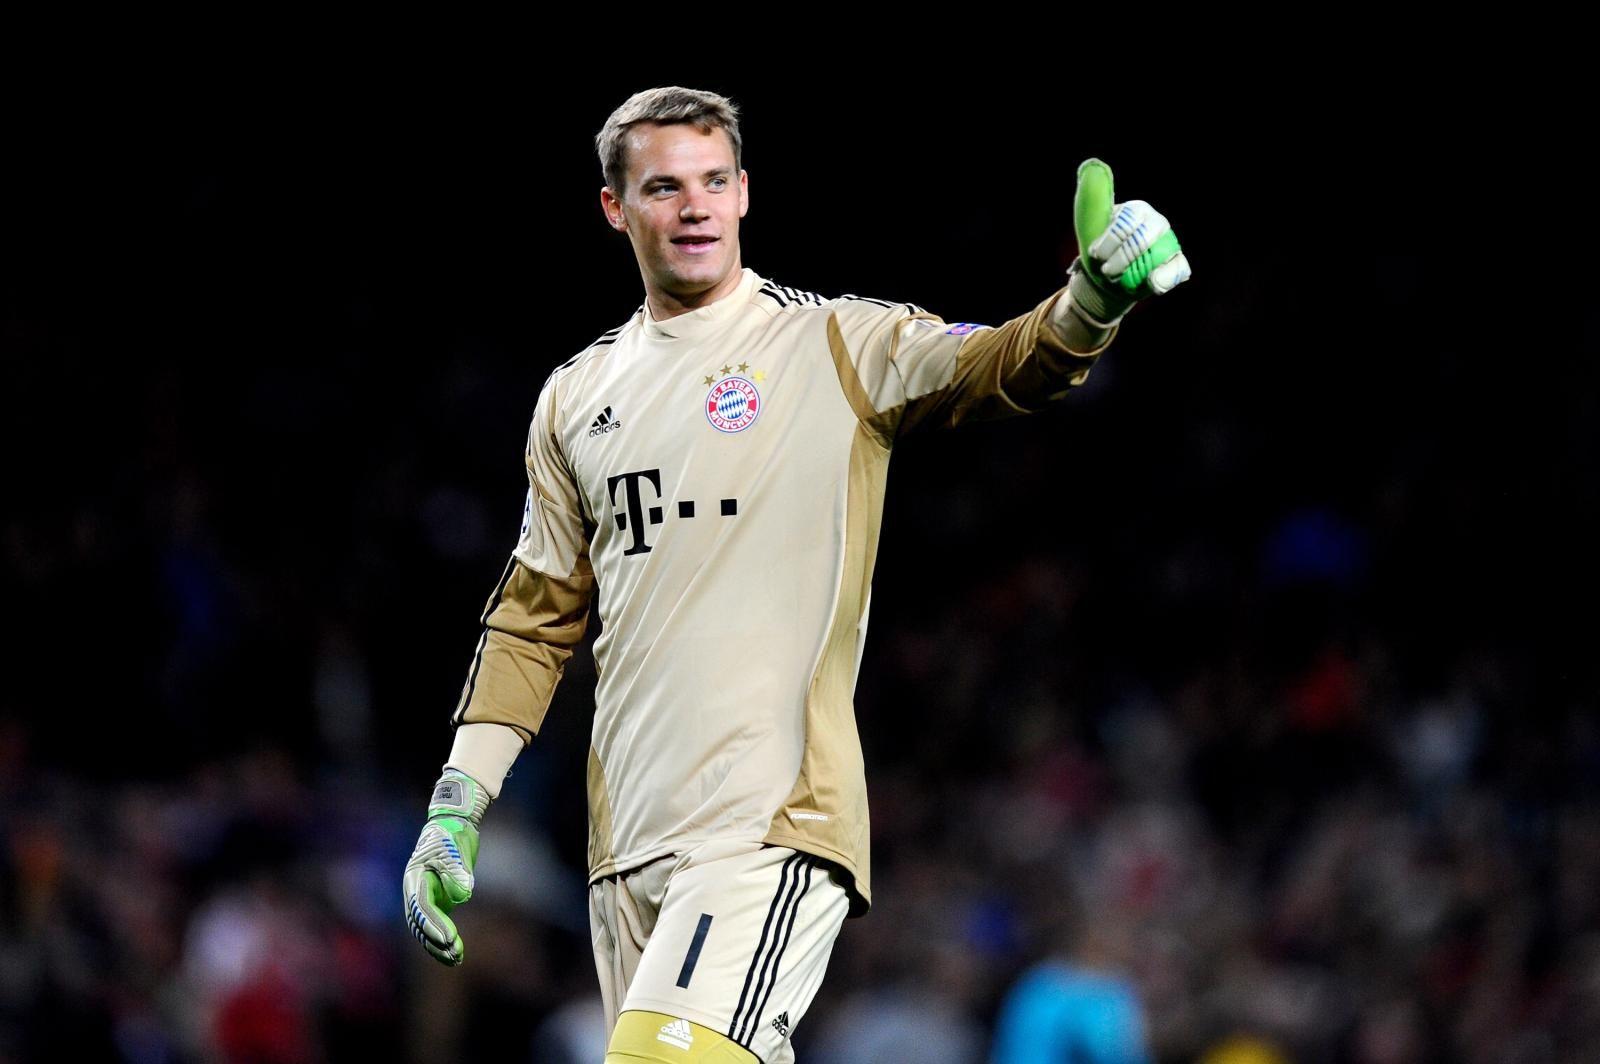 Manuel Neuer Wallpaper High Resolution and Quality Download